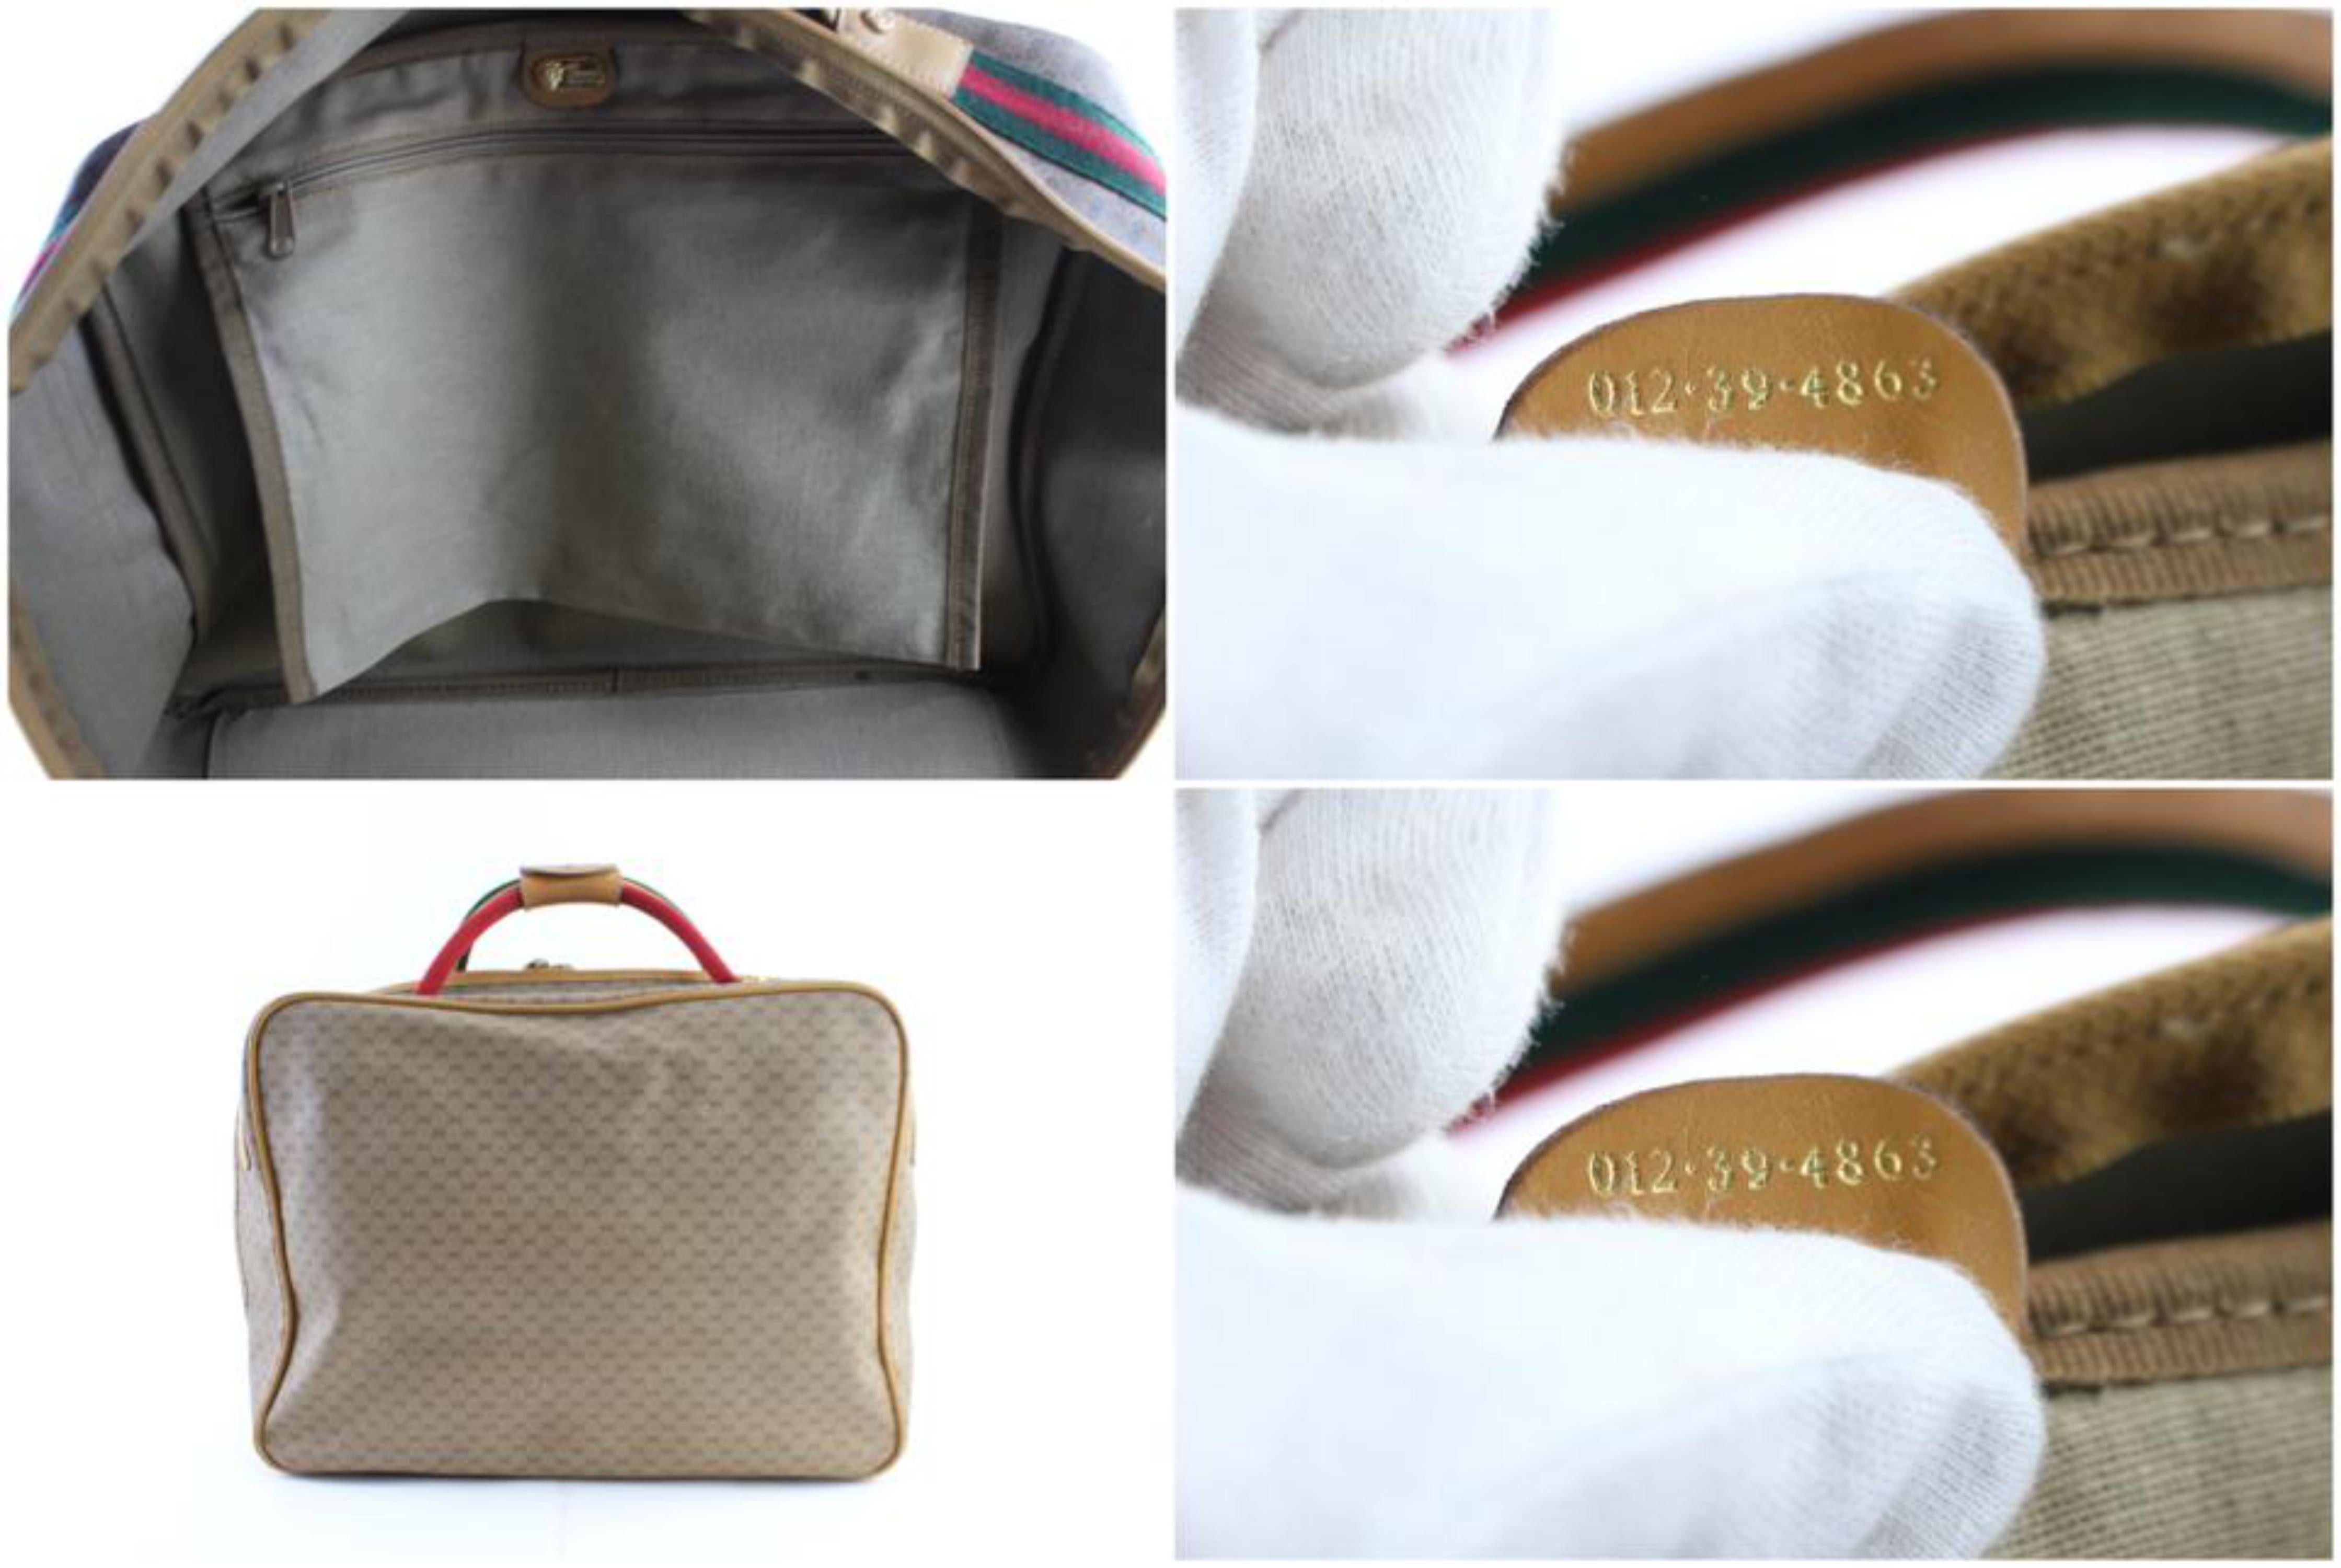 Women's Gucci Duffle Web Monogram Suitcase 224269 Beige Leather Weekend/Travel Bag For Sale